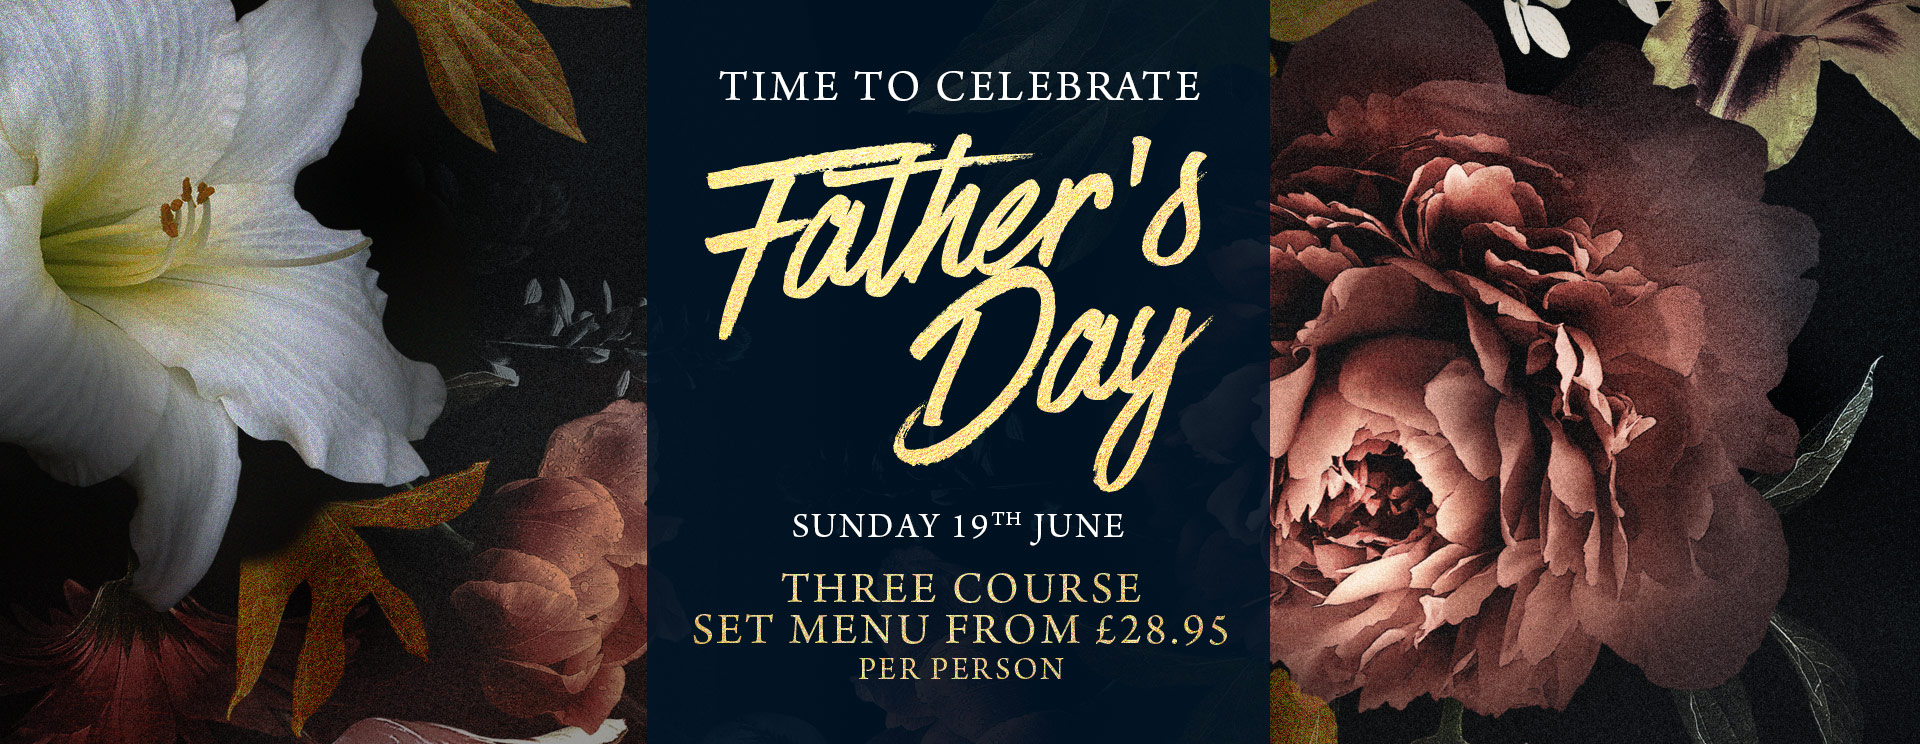 Fathers Day at The Orange Tree